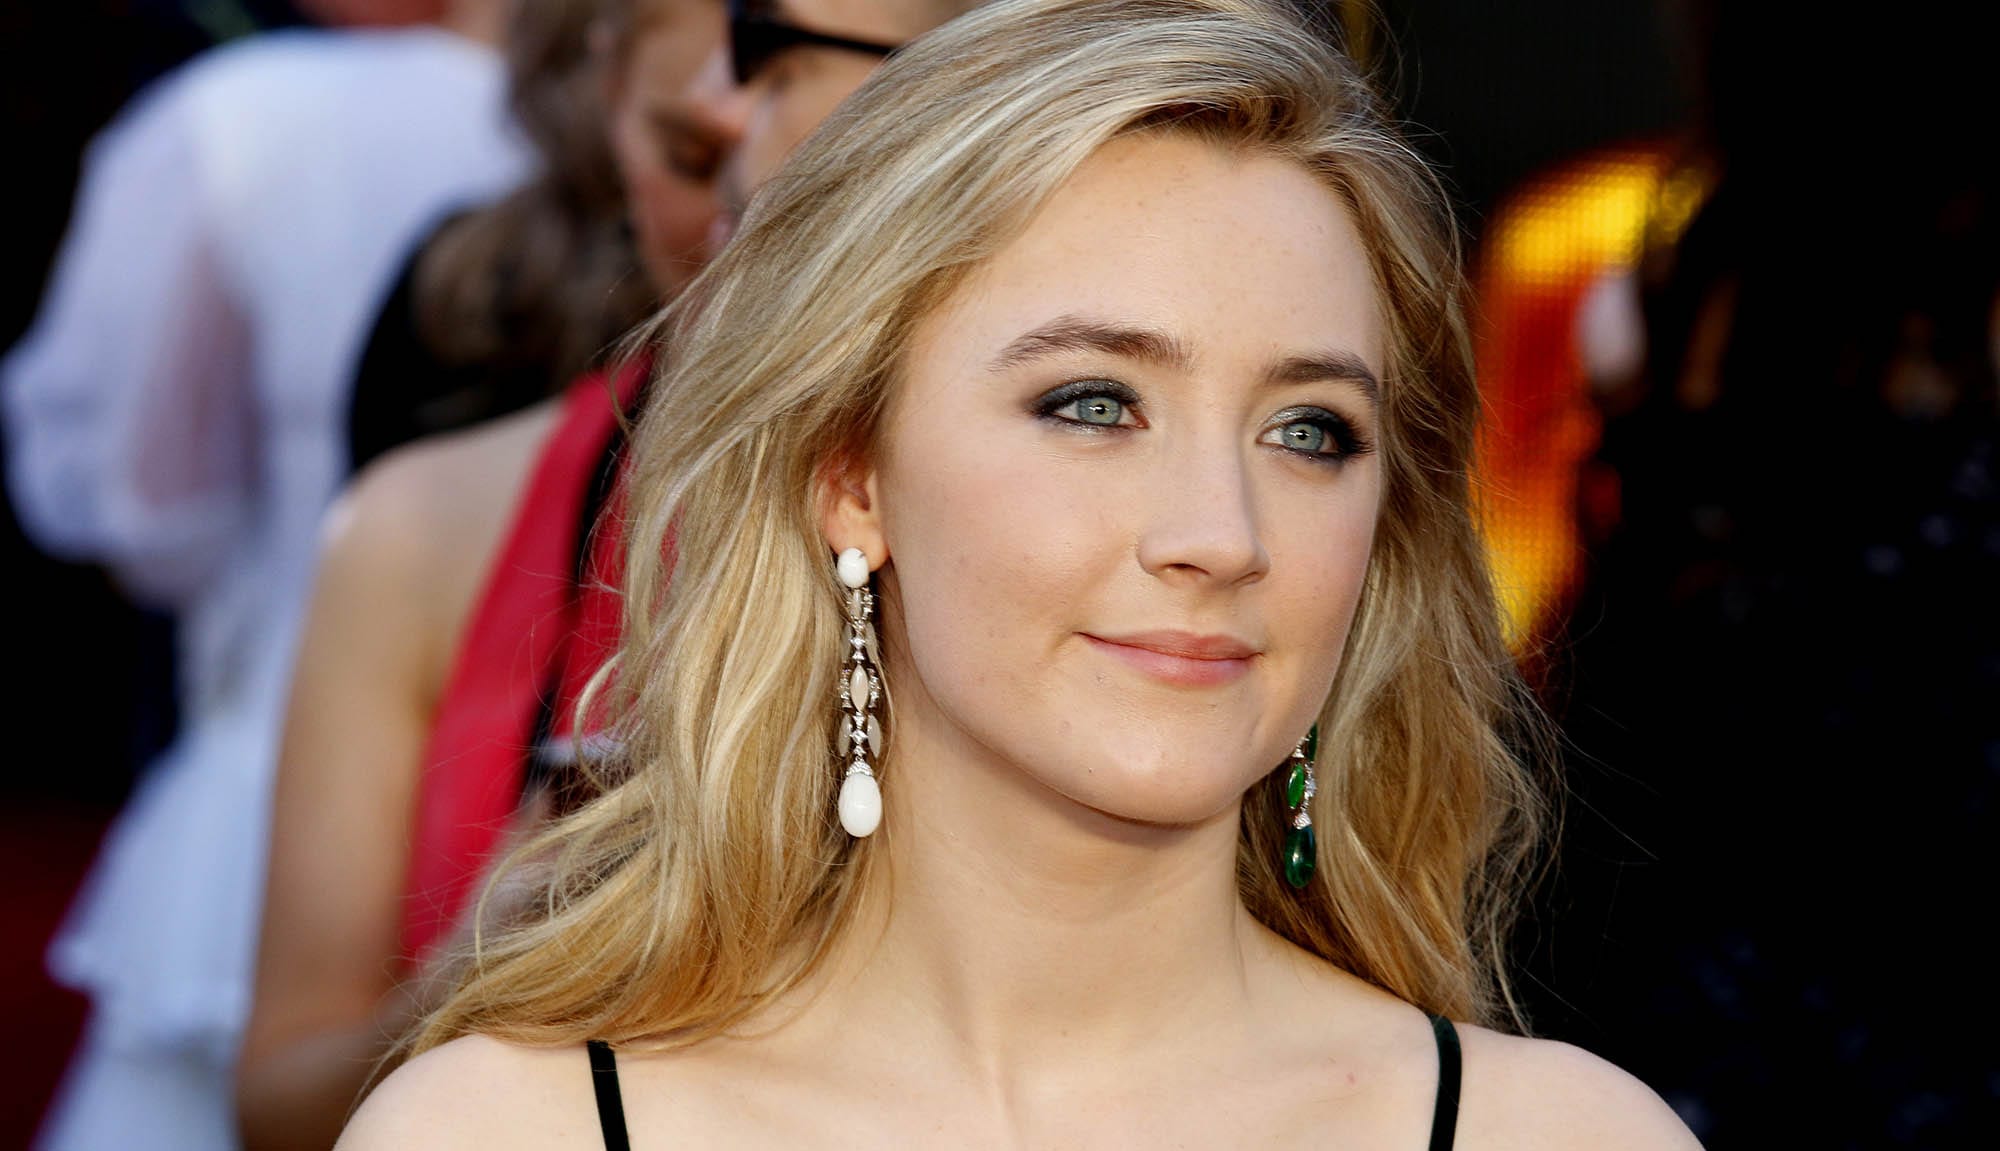 Saoirse Ronan Height Feet Inches cm Weight Body Measurements